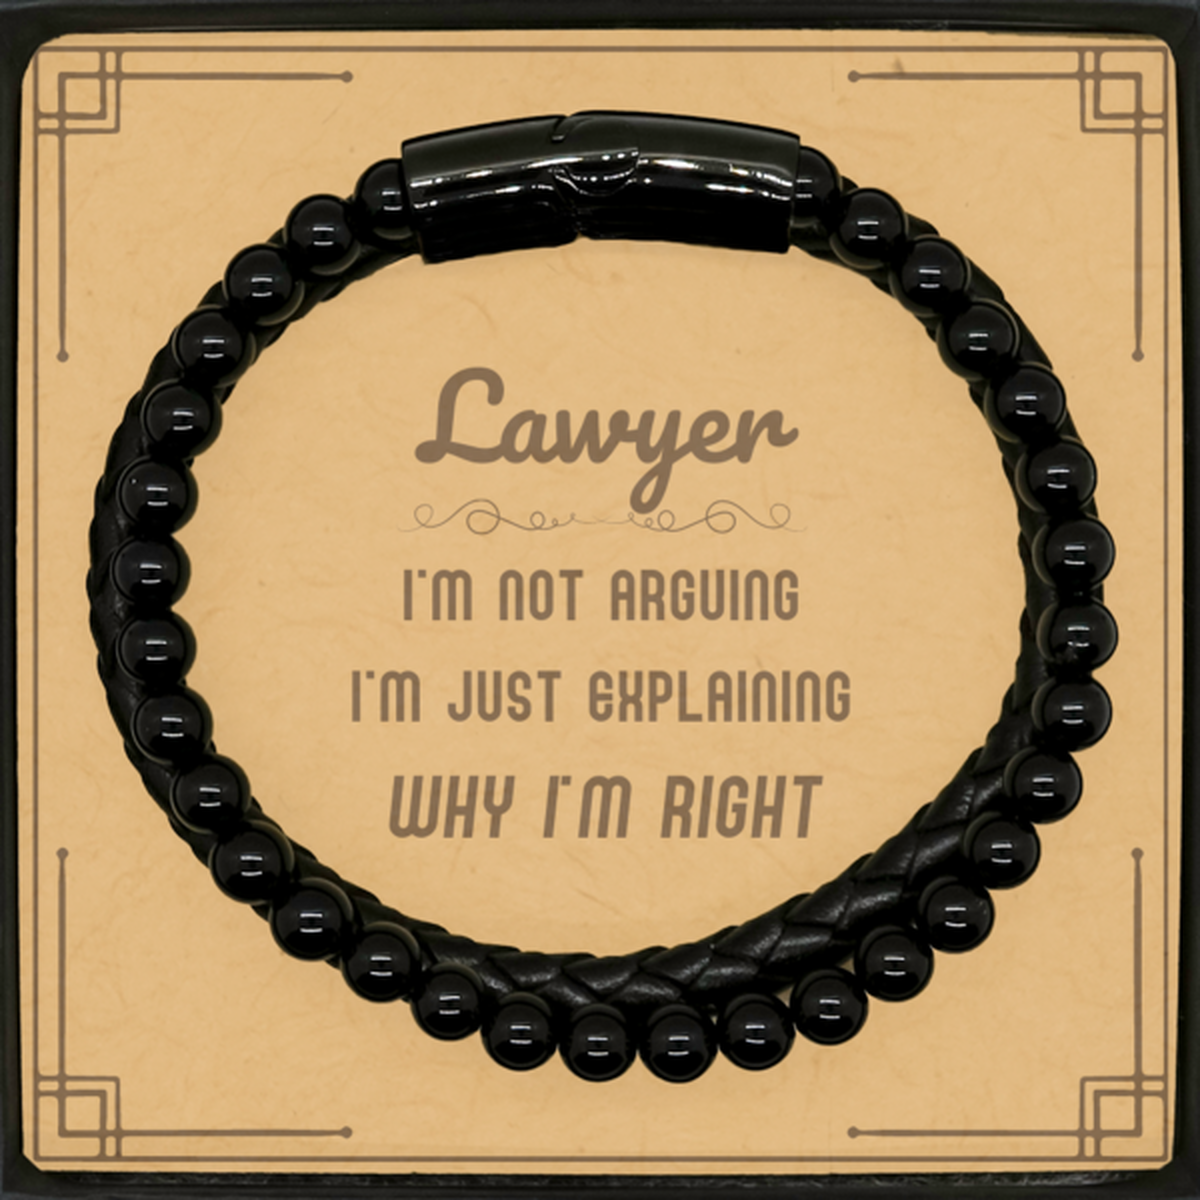 Lawyer I'm not Arguing. I'm Just Explaining Why I'm RIGHT Stone Leather Bracelets, Funny Saying Quote Lawyer Gifts For Lawyer Message Card Graduation Birthday Christmas Gifts for Men Women Coworker